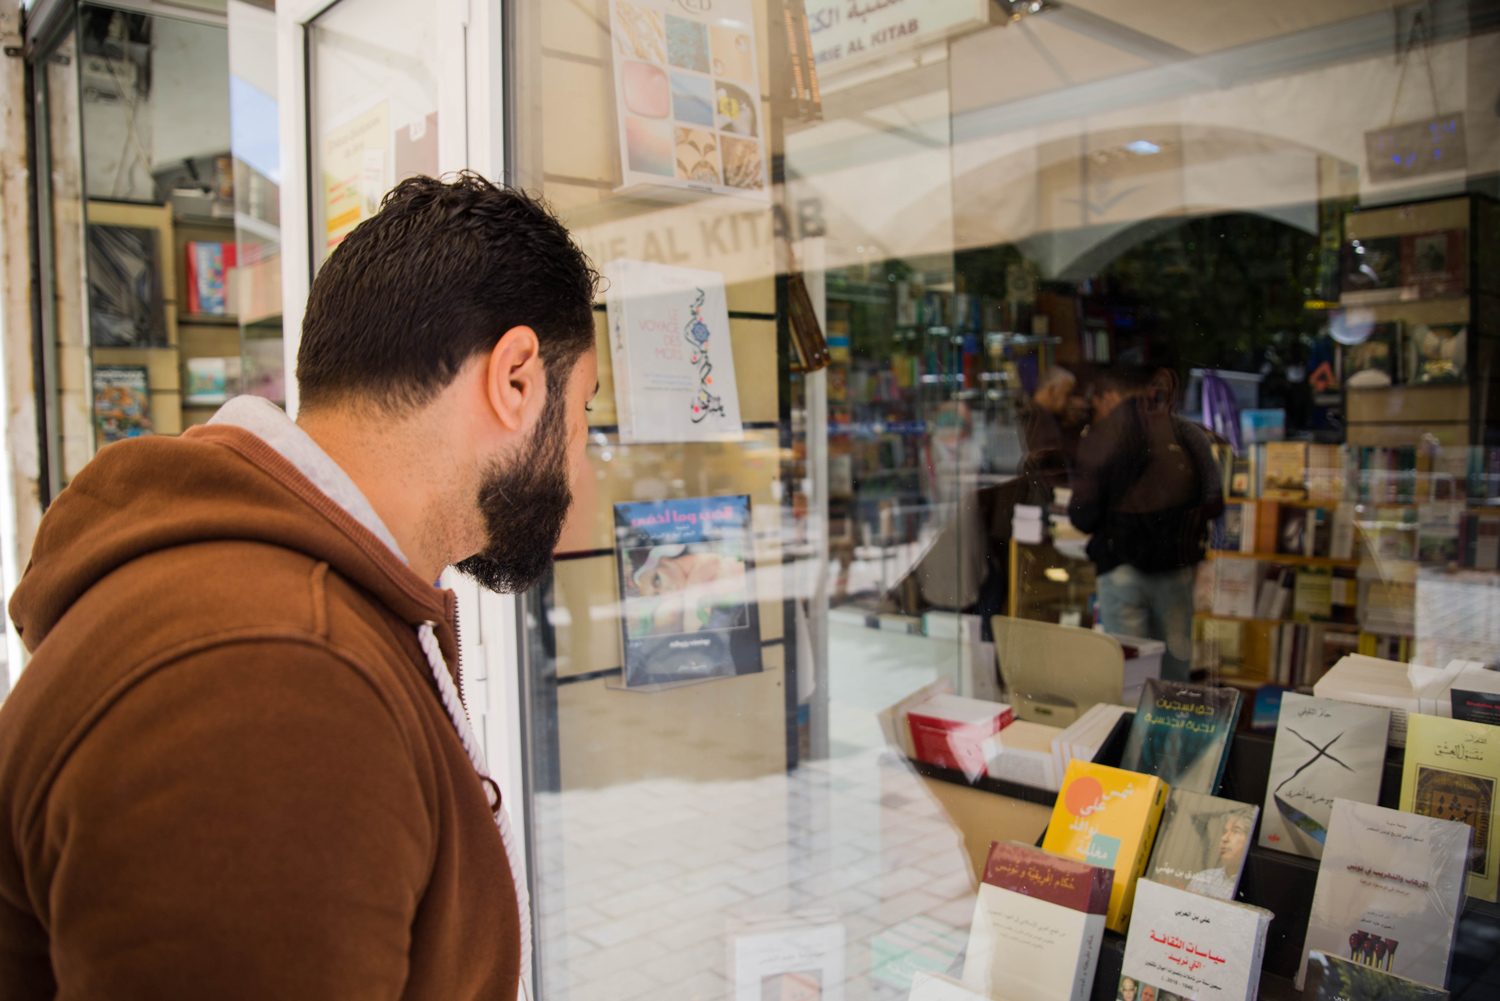 Hosam Athani looks at a copy of Sun on Closed Windows in a bookstore in Tunis.